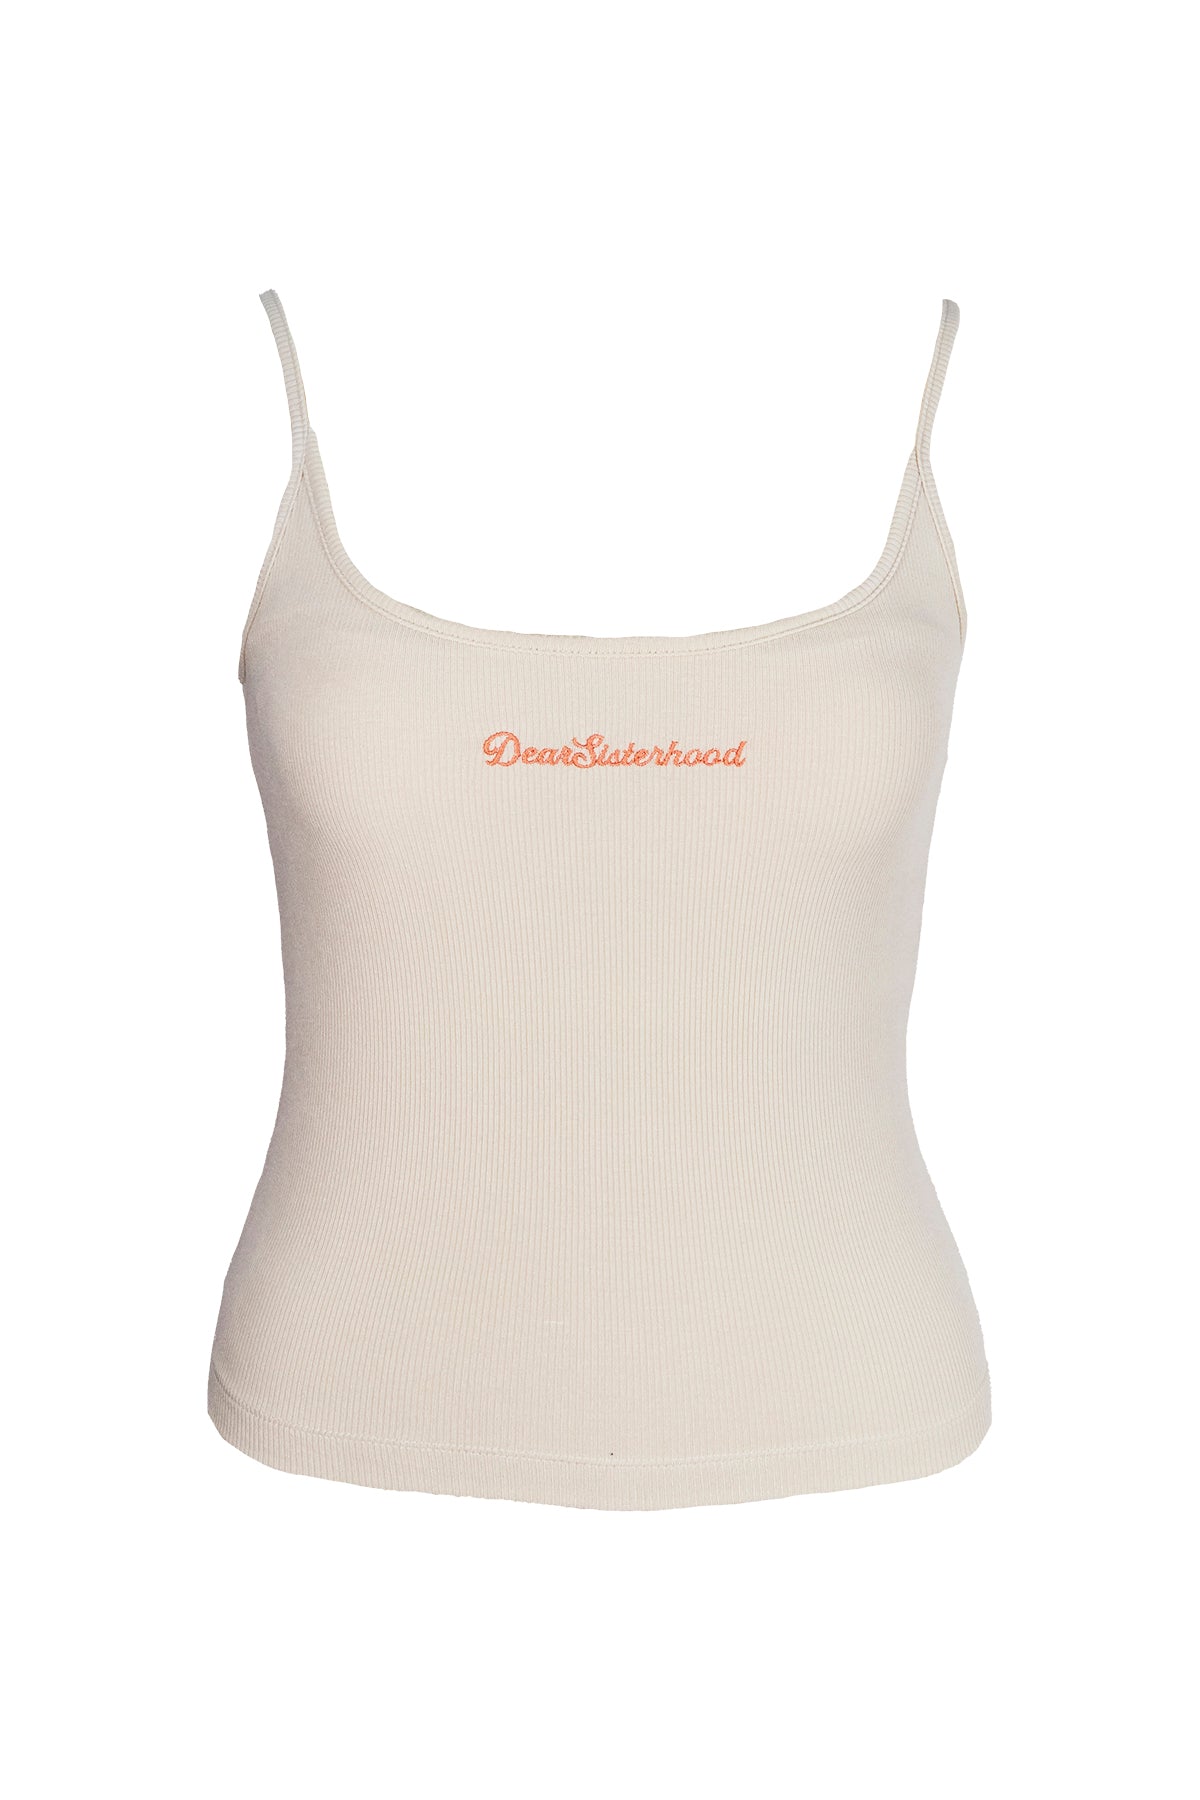 SISTERS Bra Cup Camisole / Ivory